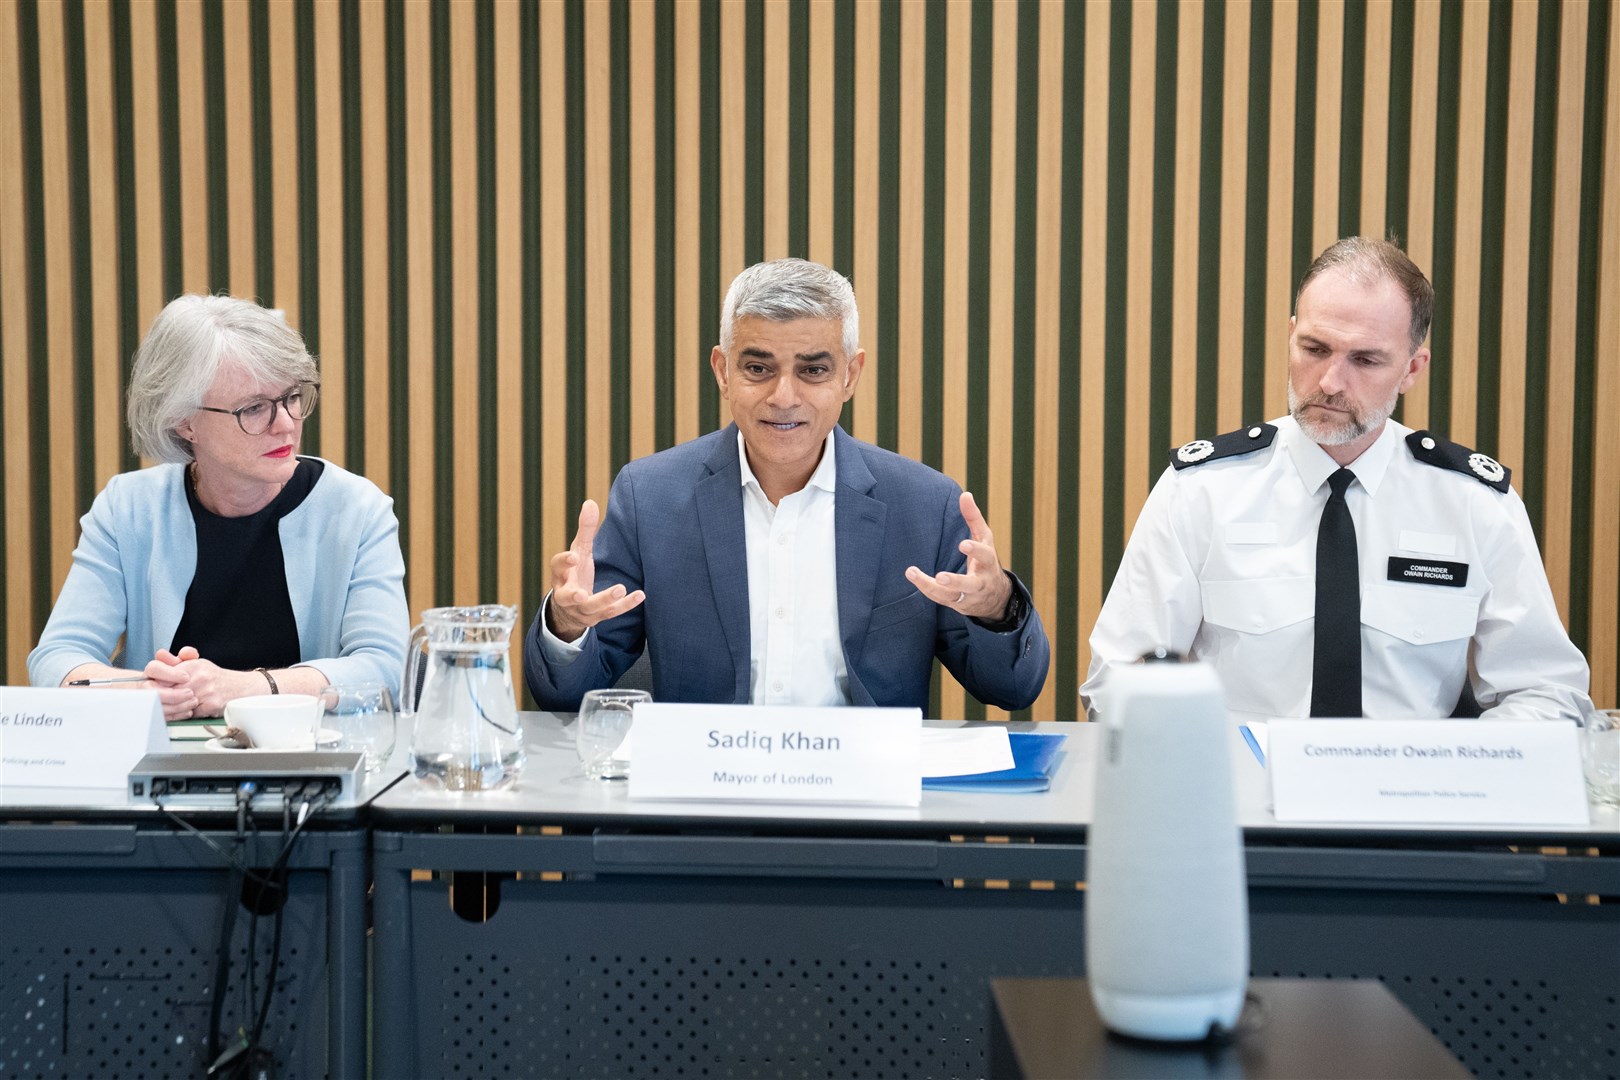 Mayor of London Sadiq Khan at a multifaith roundtable with Jewish and Muslim faith leaders at City Hall in London (Stefan Rousseau/PA)